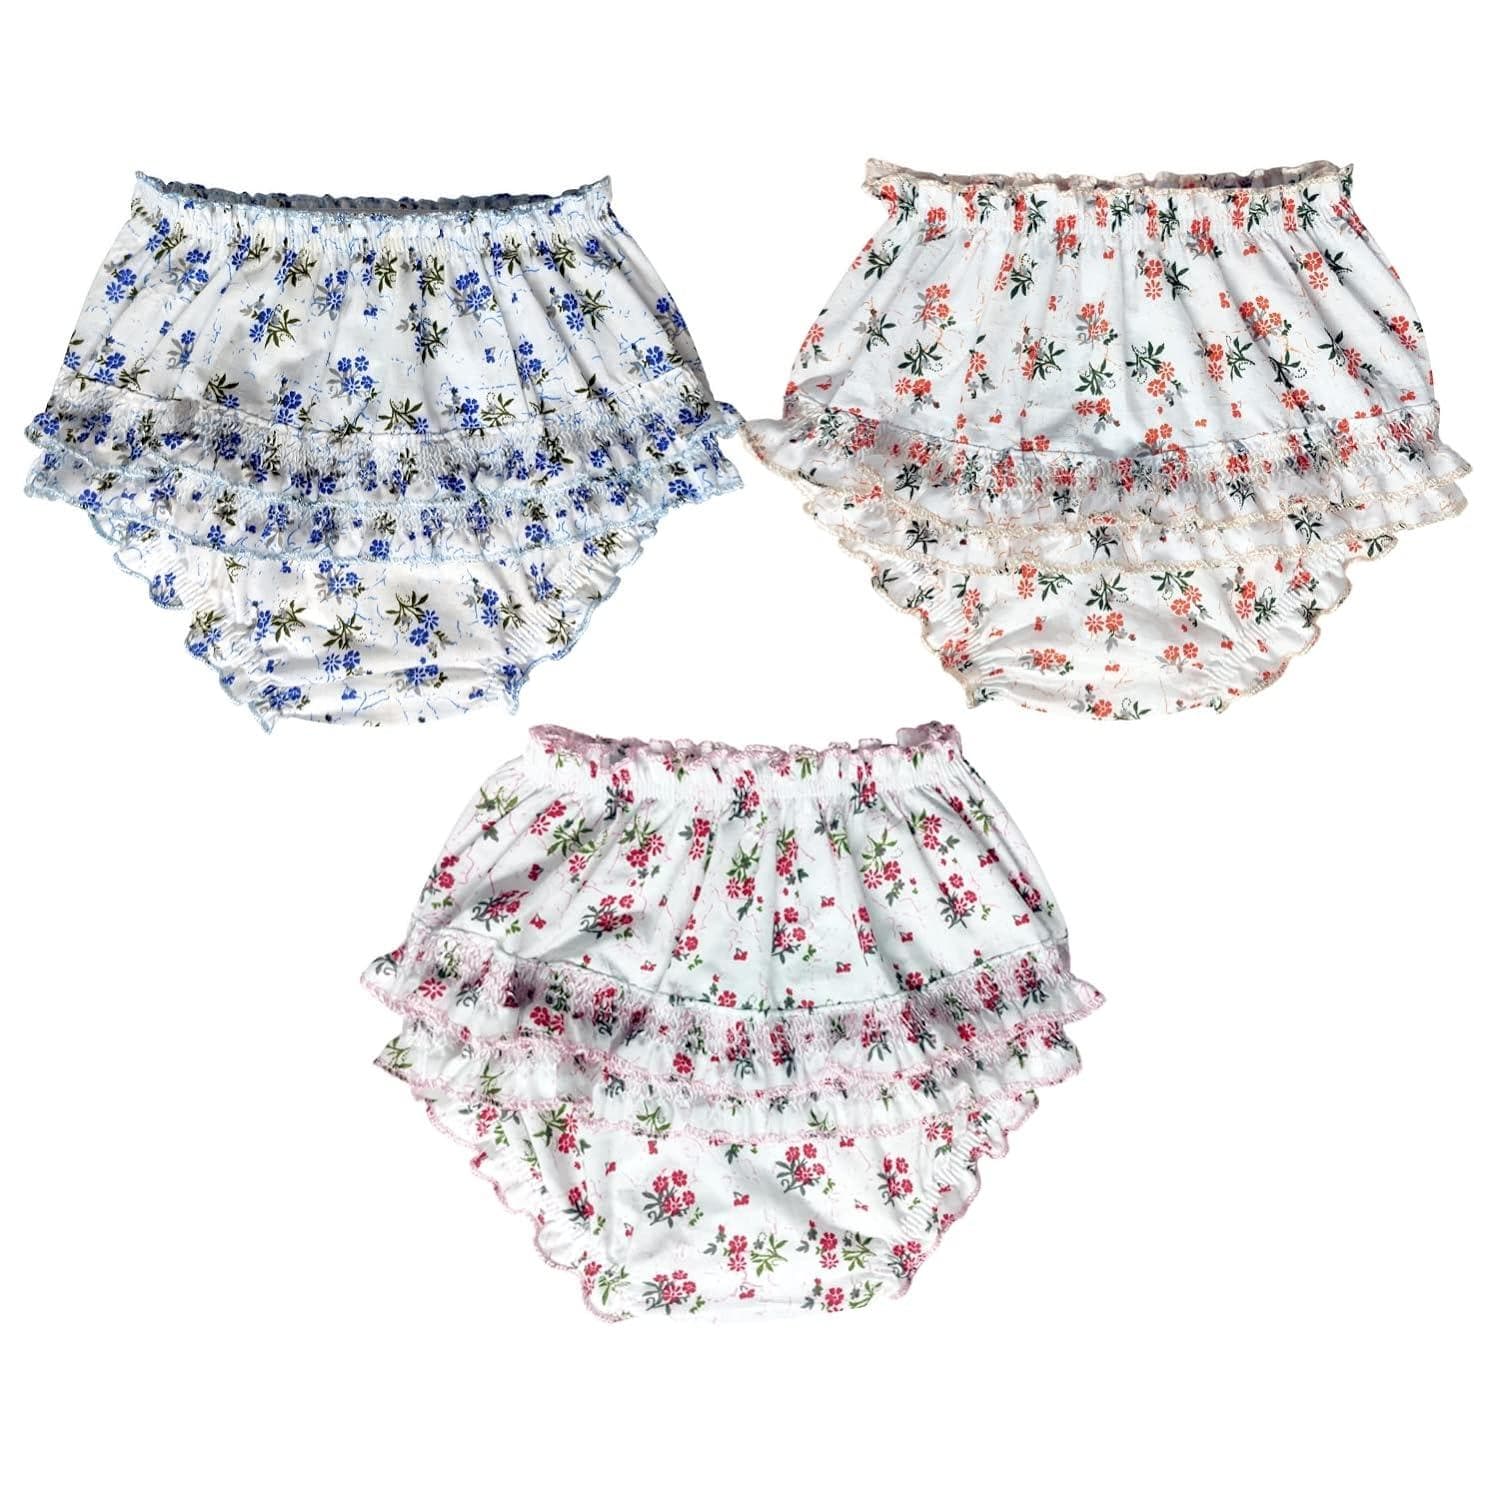 KIDS & BEBS Baby Girl's Cotton Multicolor And Multiprint Panties with Frill, Pack of 3 (Flower Print Frill Panty, 9-12 Months) - halfpeapp